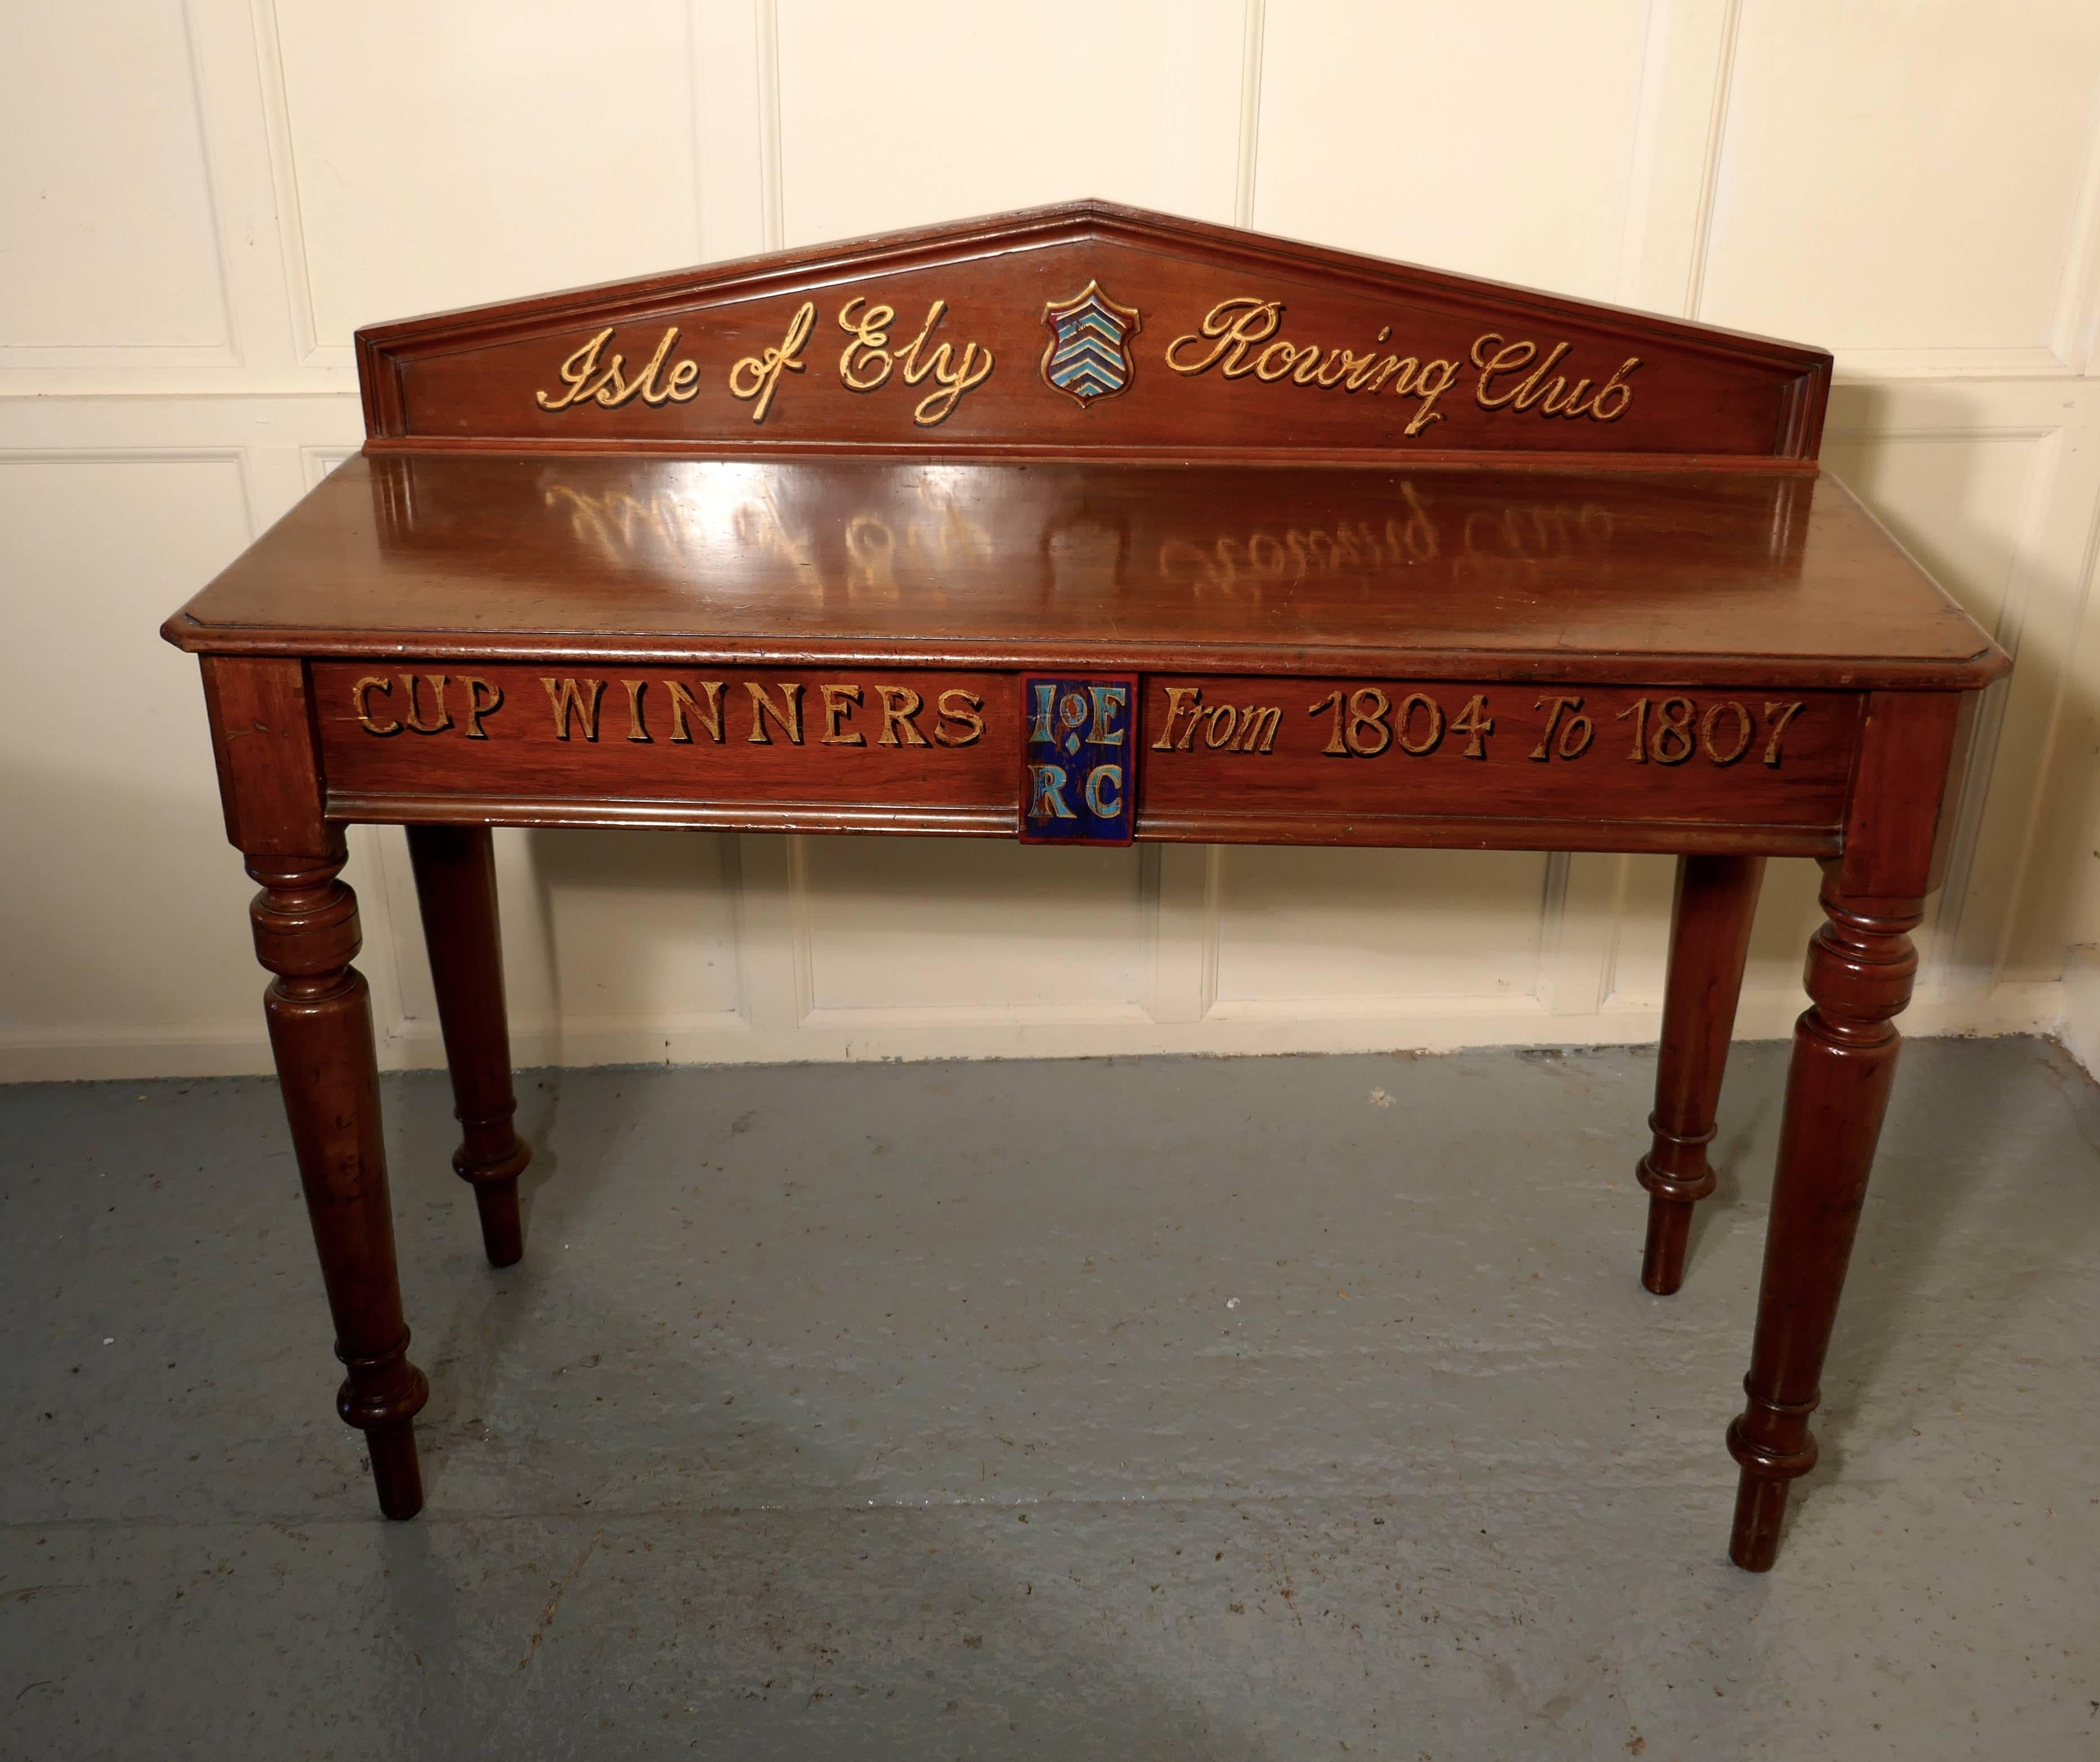 19th Century Victorian Mahogany Side Table from “Theisle of Ely” Rowing Club